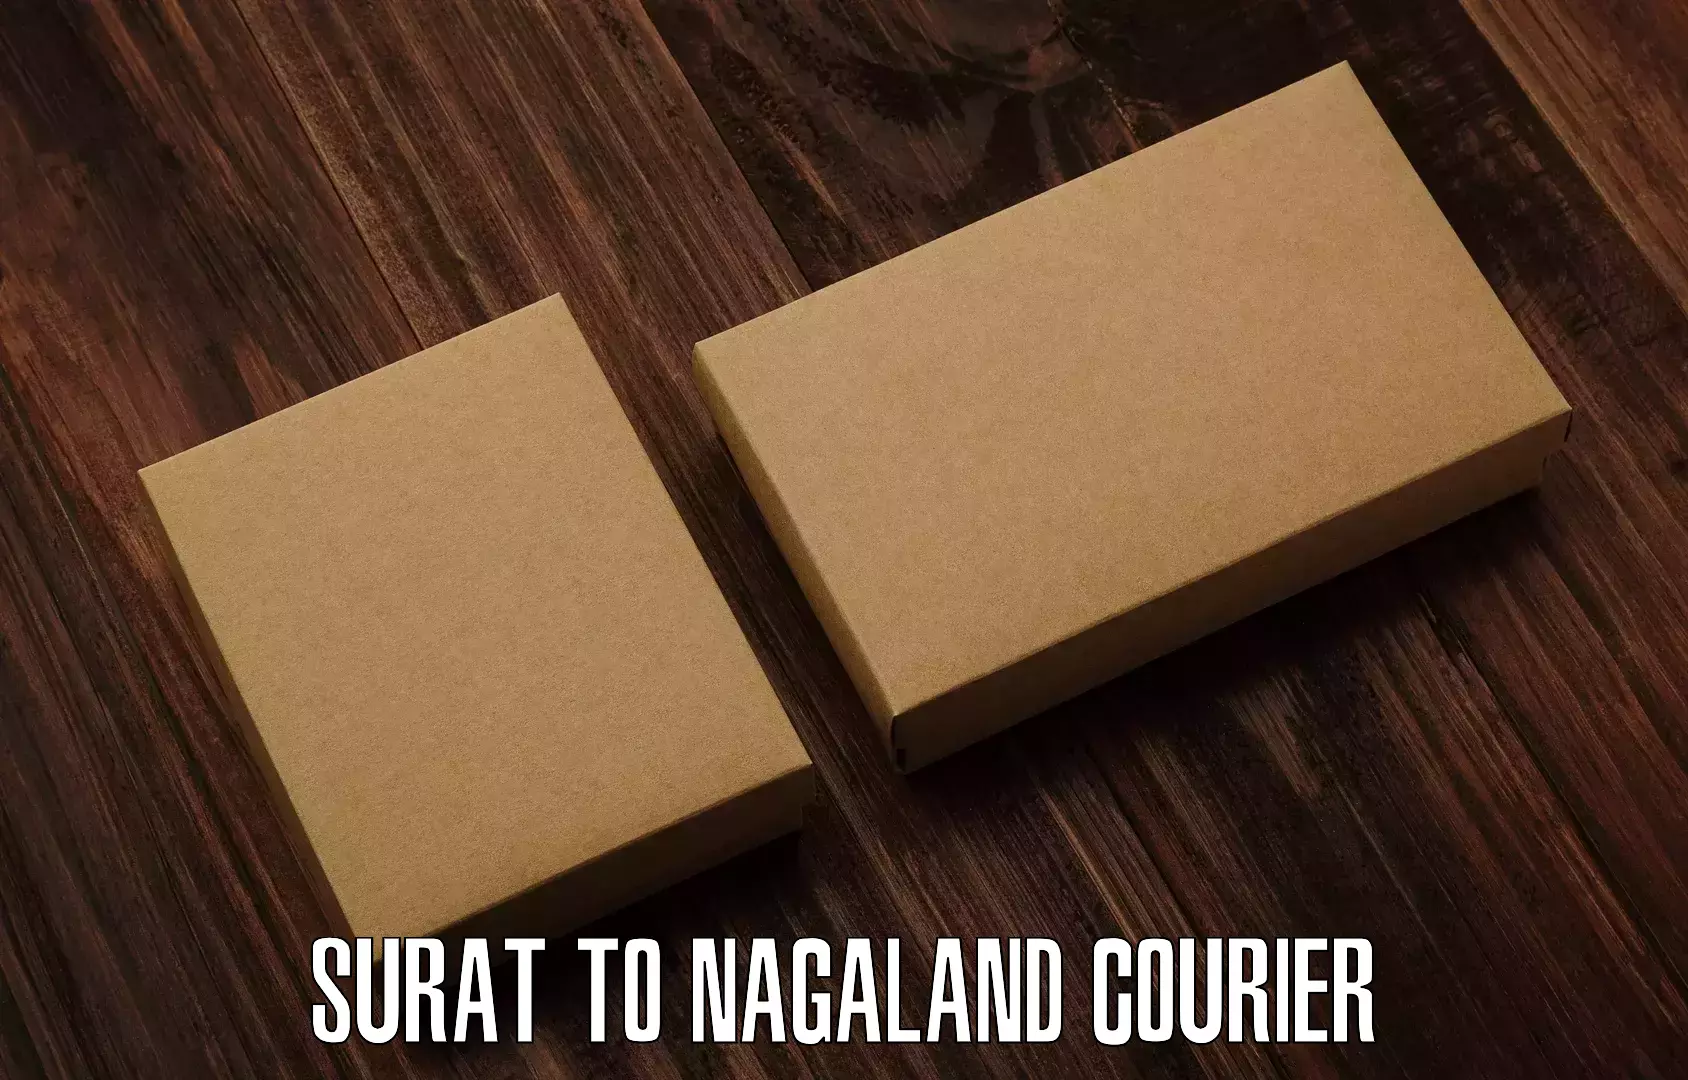 On-call courier service Surat to Dimapur